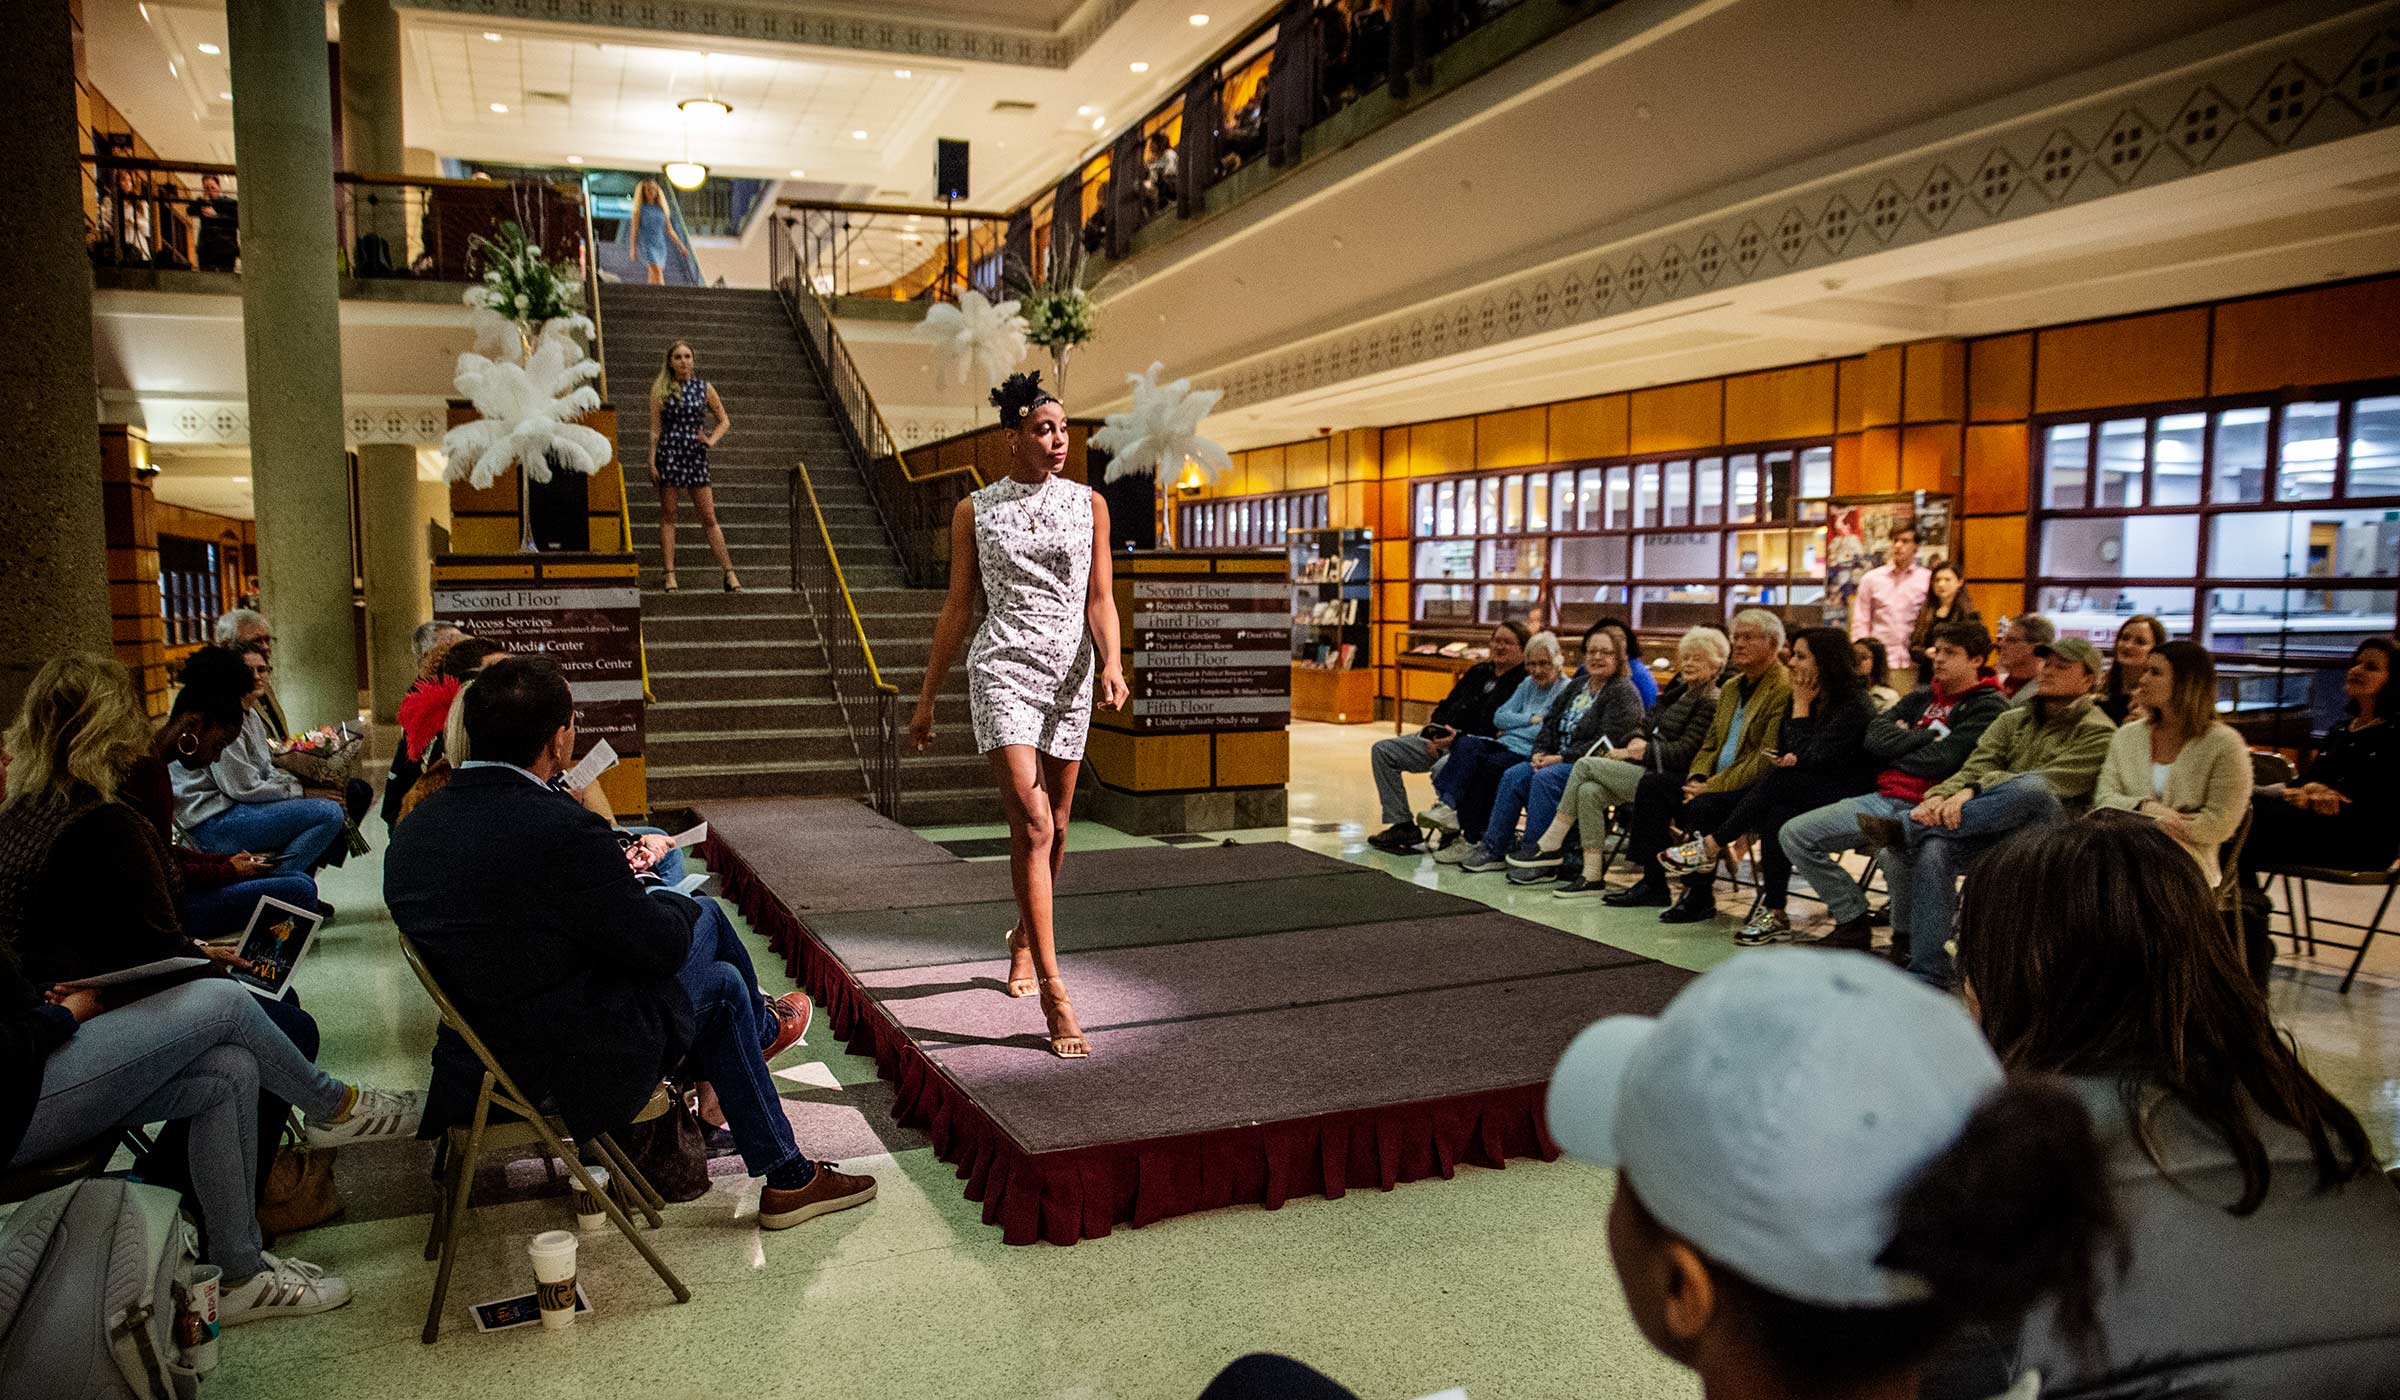 Lit by a spotlight, models in 1920s clothes walk down the Library stairs and work the runway at the base surrounded by the seated audience.